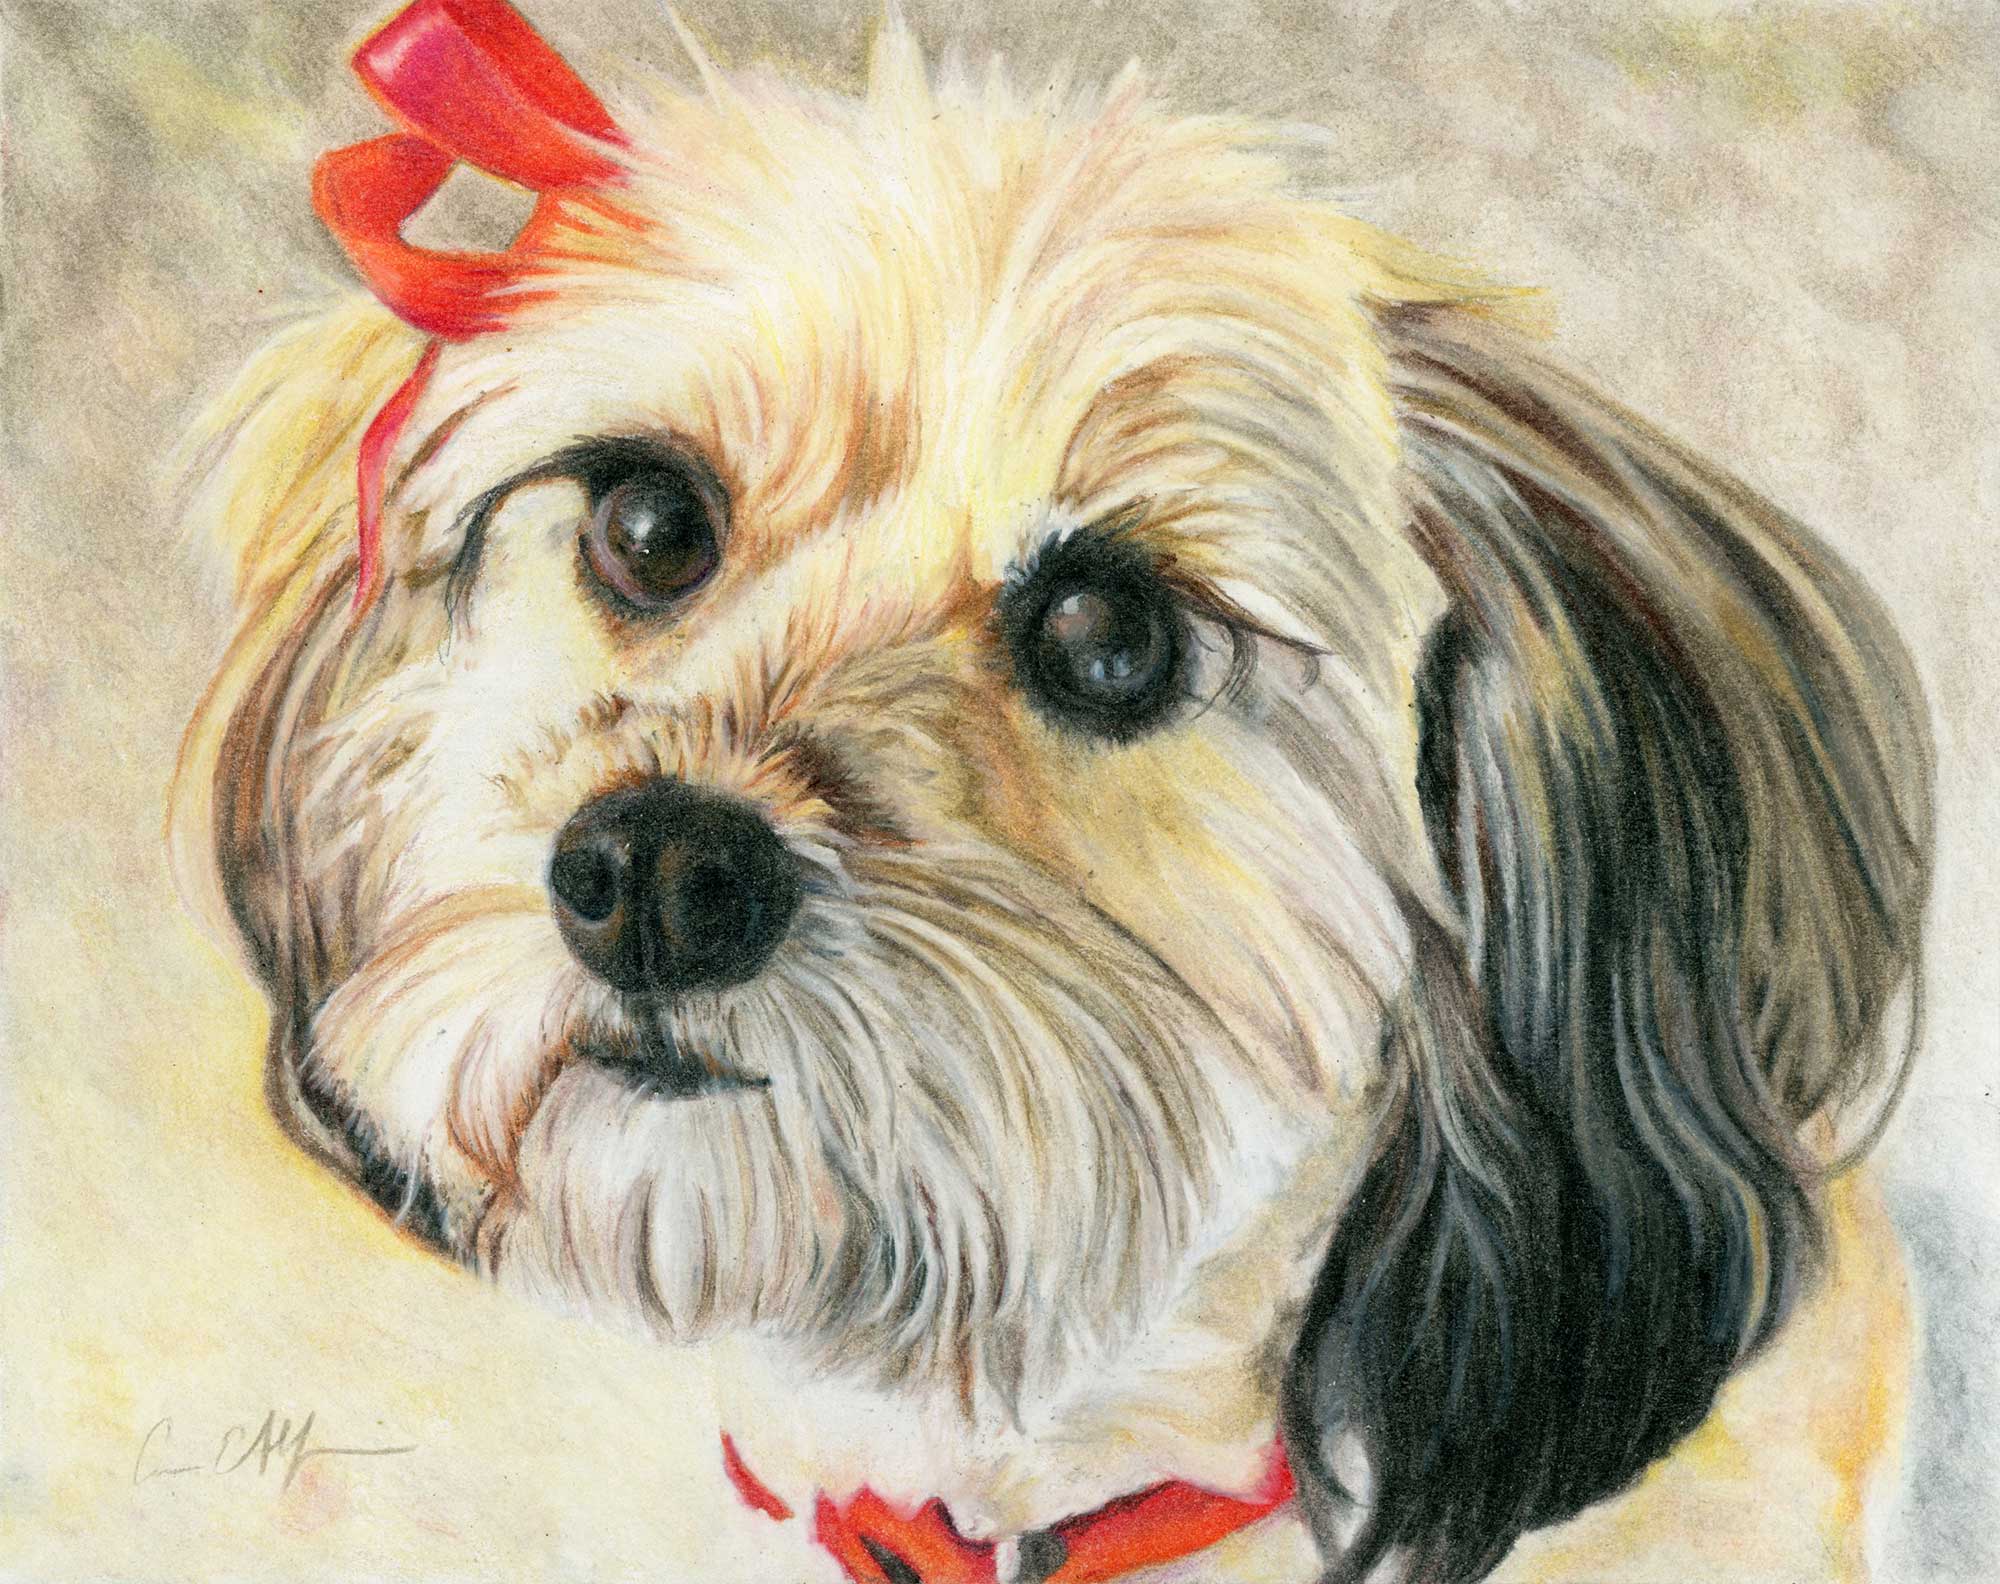 SOLD - "Red Ribbon", 8" x 10", colored pencil